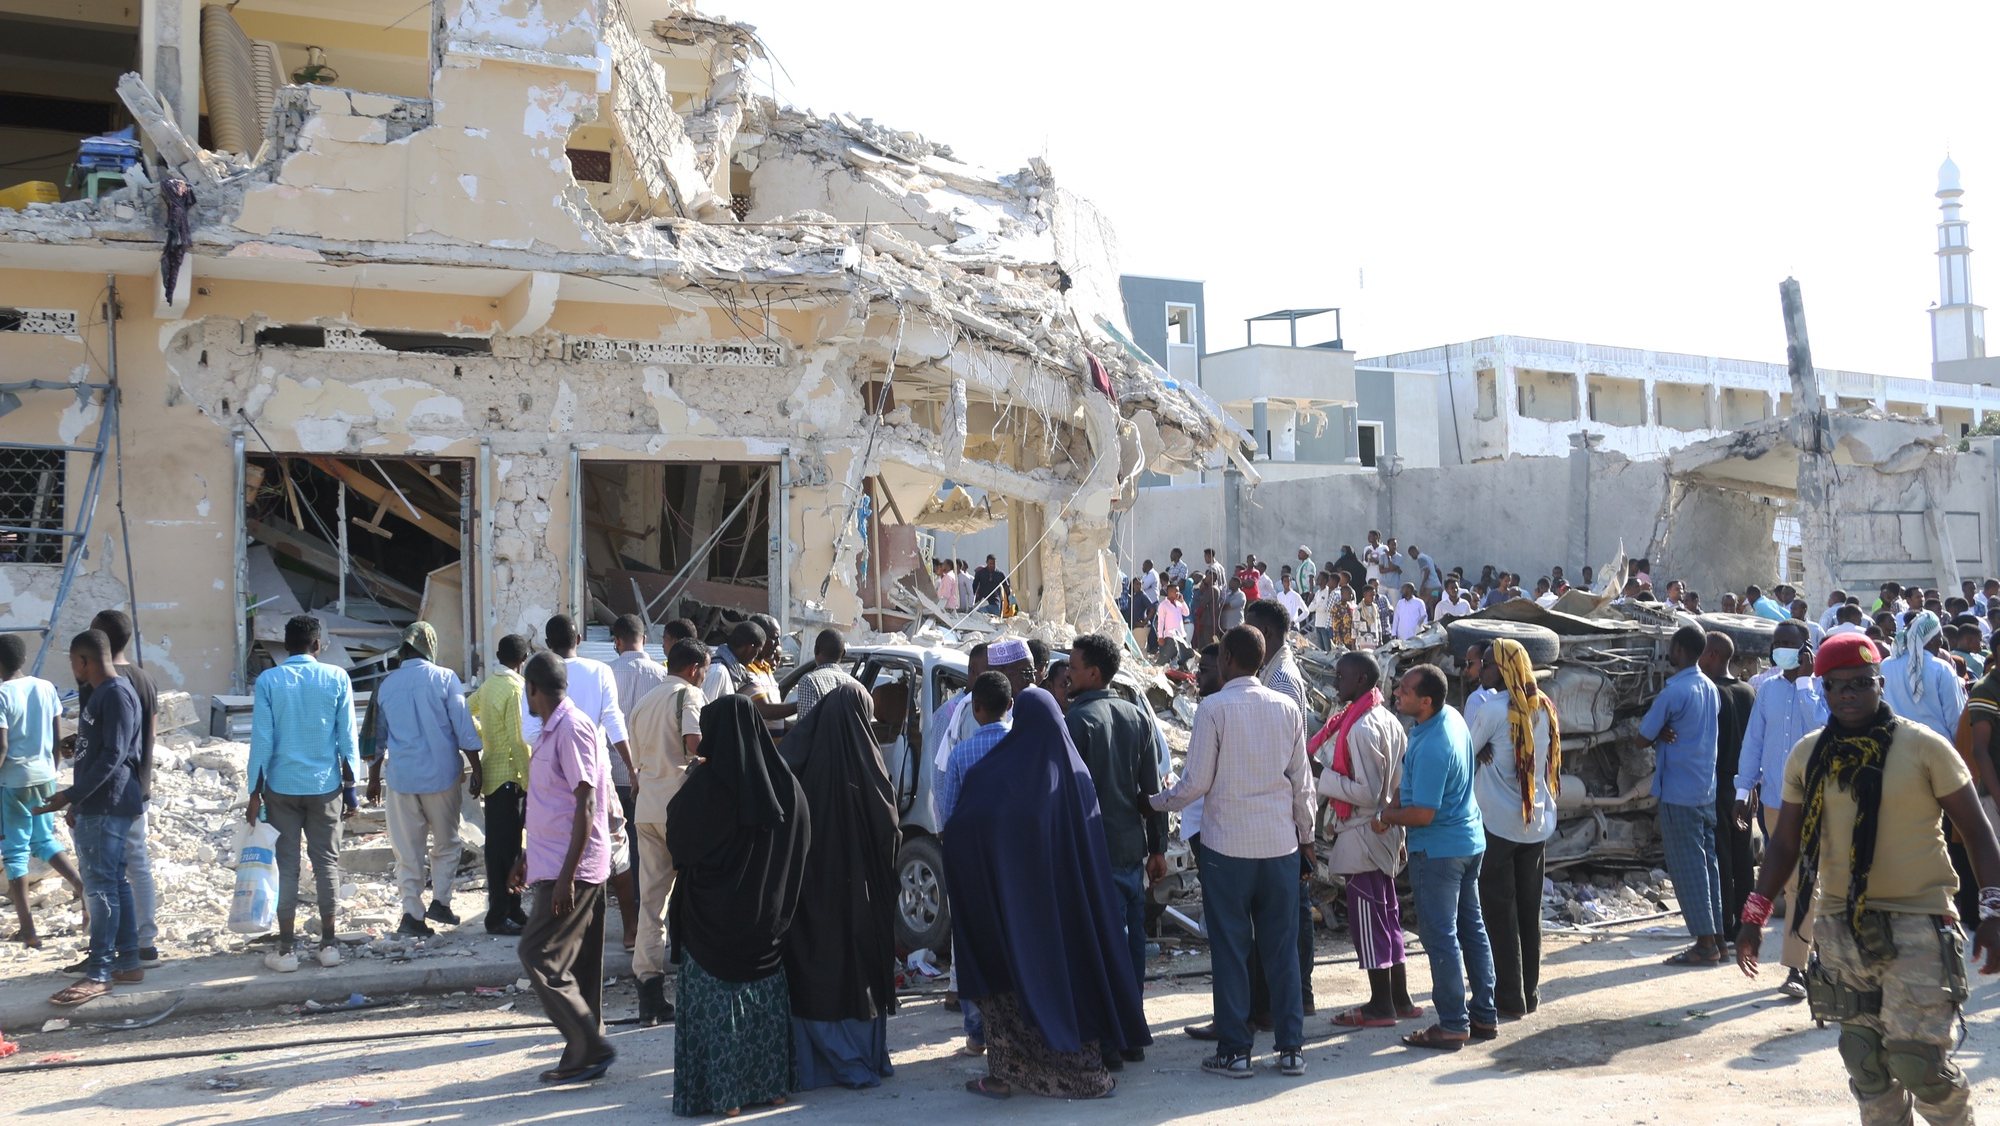 epa10274749 A damaged building in the aftermath of two explosions in Mogadishu, Somalia, 30 October 2022. At least 100 people were killed and over 300 were injured on 29 October, when two car bombs exploded at a busy junction near key government offices, Somali President Hassan Sheikh Mohamud said on 30 October during a media statement at the scene of the twin blasts. The attack occurred five years after a massive blast at the same location killed hundreds of people.  EPA/SAID YUSUF WARSAME